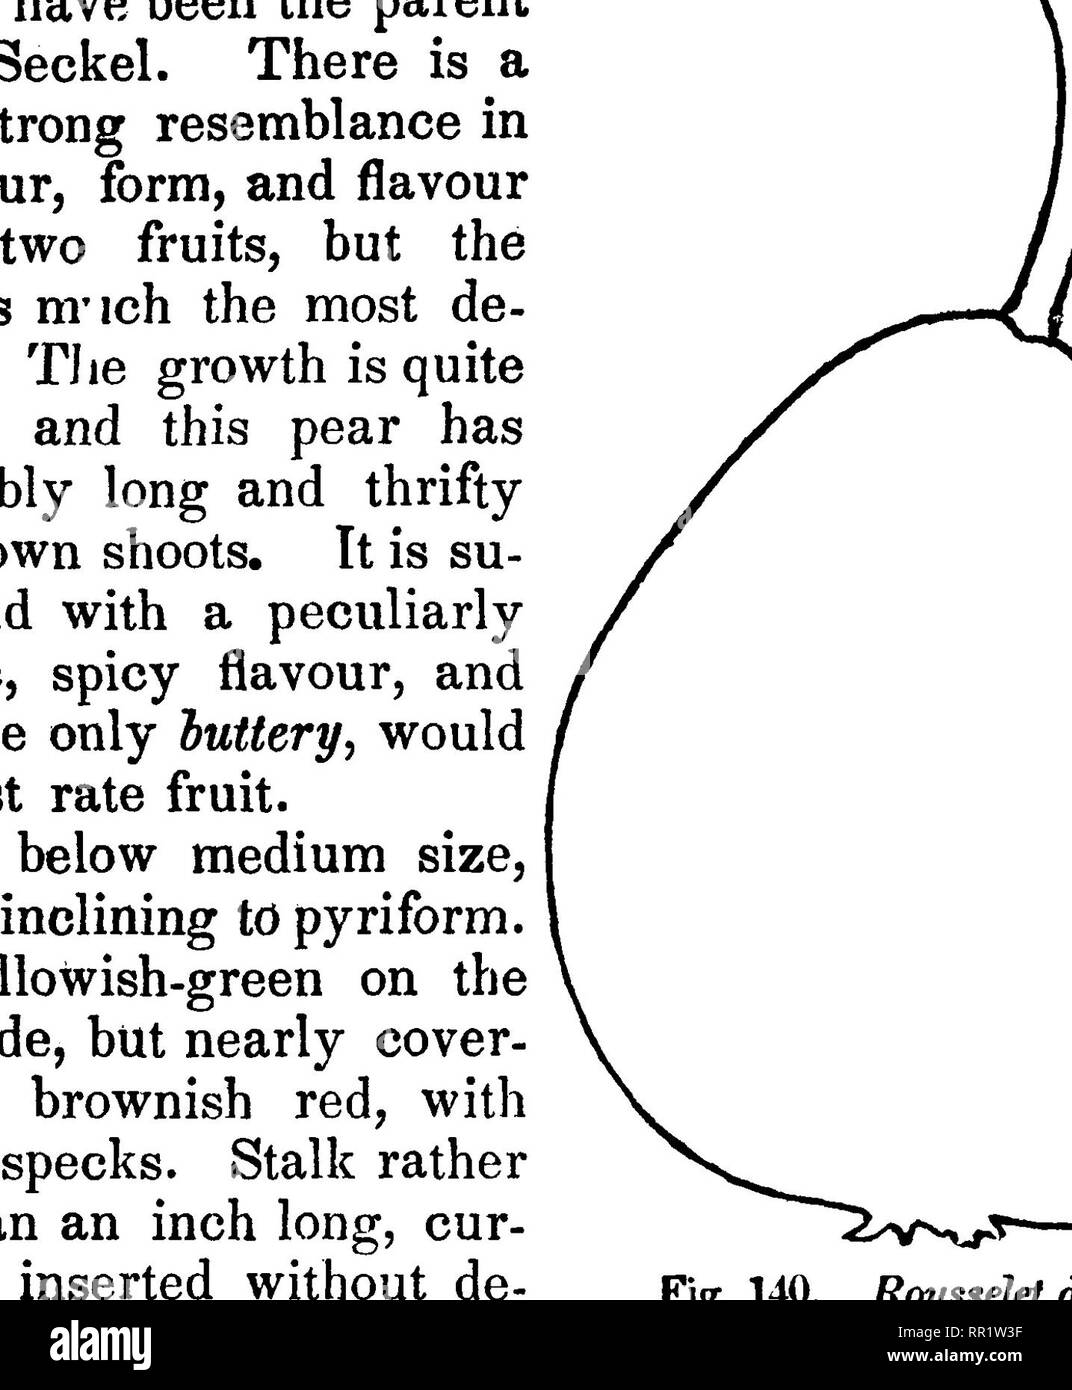 . The fruits and fruit trees of America;. Fruit-culture; Fruit. 844 THE PEAR. breaking or ^alf buttery, with a sweet, rich, aromatic flavoui Ripe at the beginning of September. 27. Sugar Top. Thomp. July Pear. Prince's Sagar. Prince's Sugar Top. The Sugar Top is one of those indifferent pears, which, frora their great productiveness and good appearance, make a figure in our markets, though not worthy of a place in a good garden. Great quantities of the Sugar Top pear may be seen in the New- York markets in July. Fruit of medium size, very regular, roundish-top-shaped. Skin smooth, and very bri Stock Photo